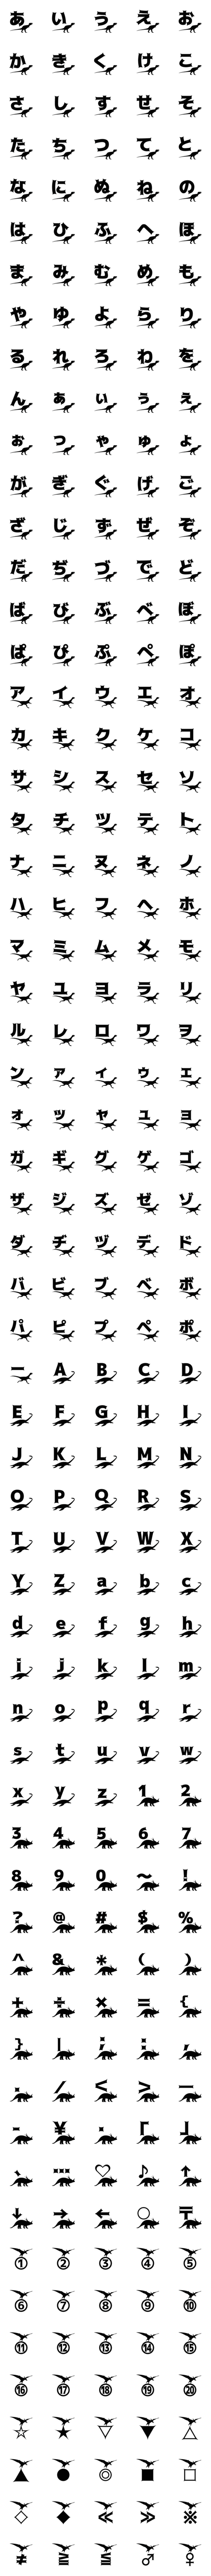 [LINE絵文字]恐竜絵文字(黒)の画像一覧